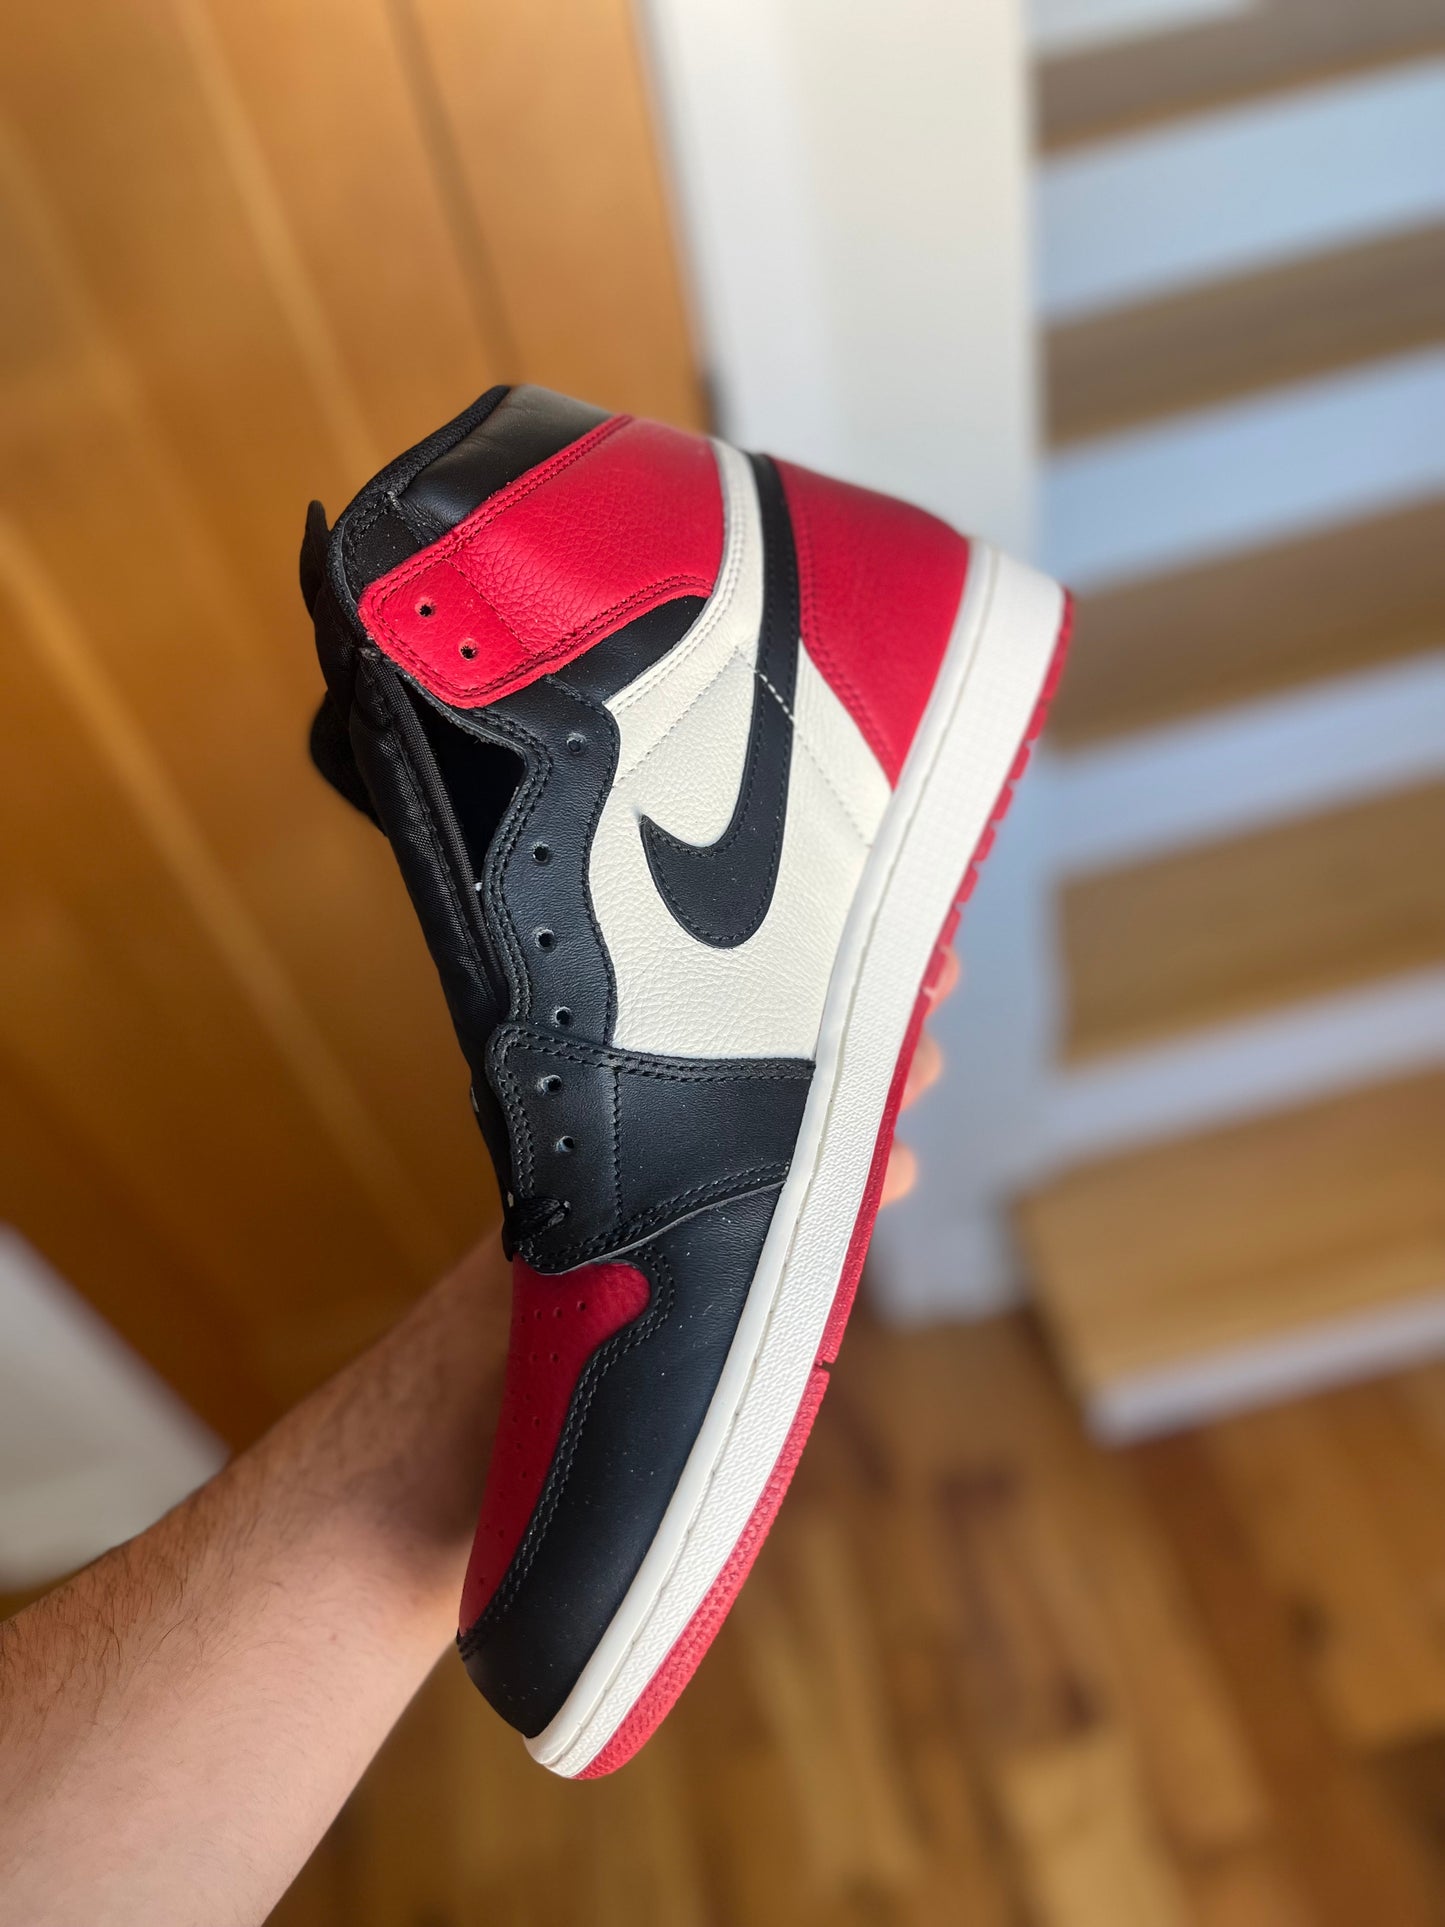 Bred toe (size 13)